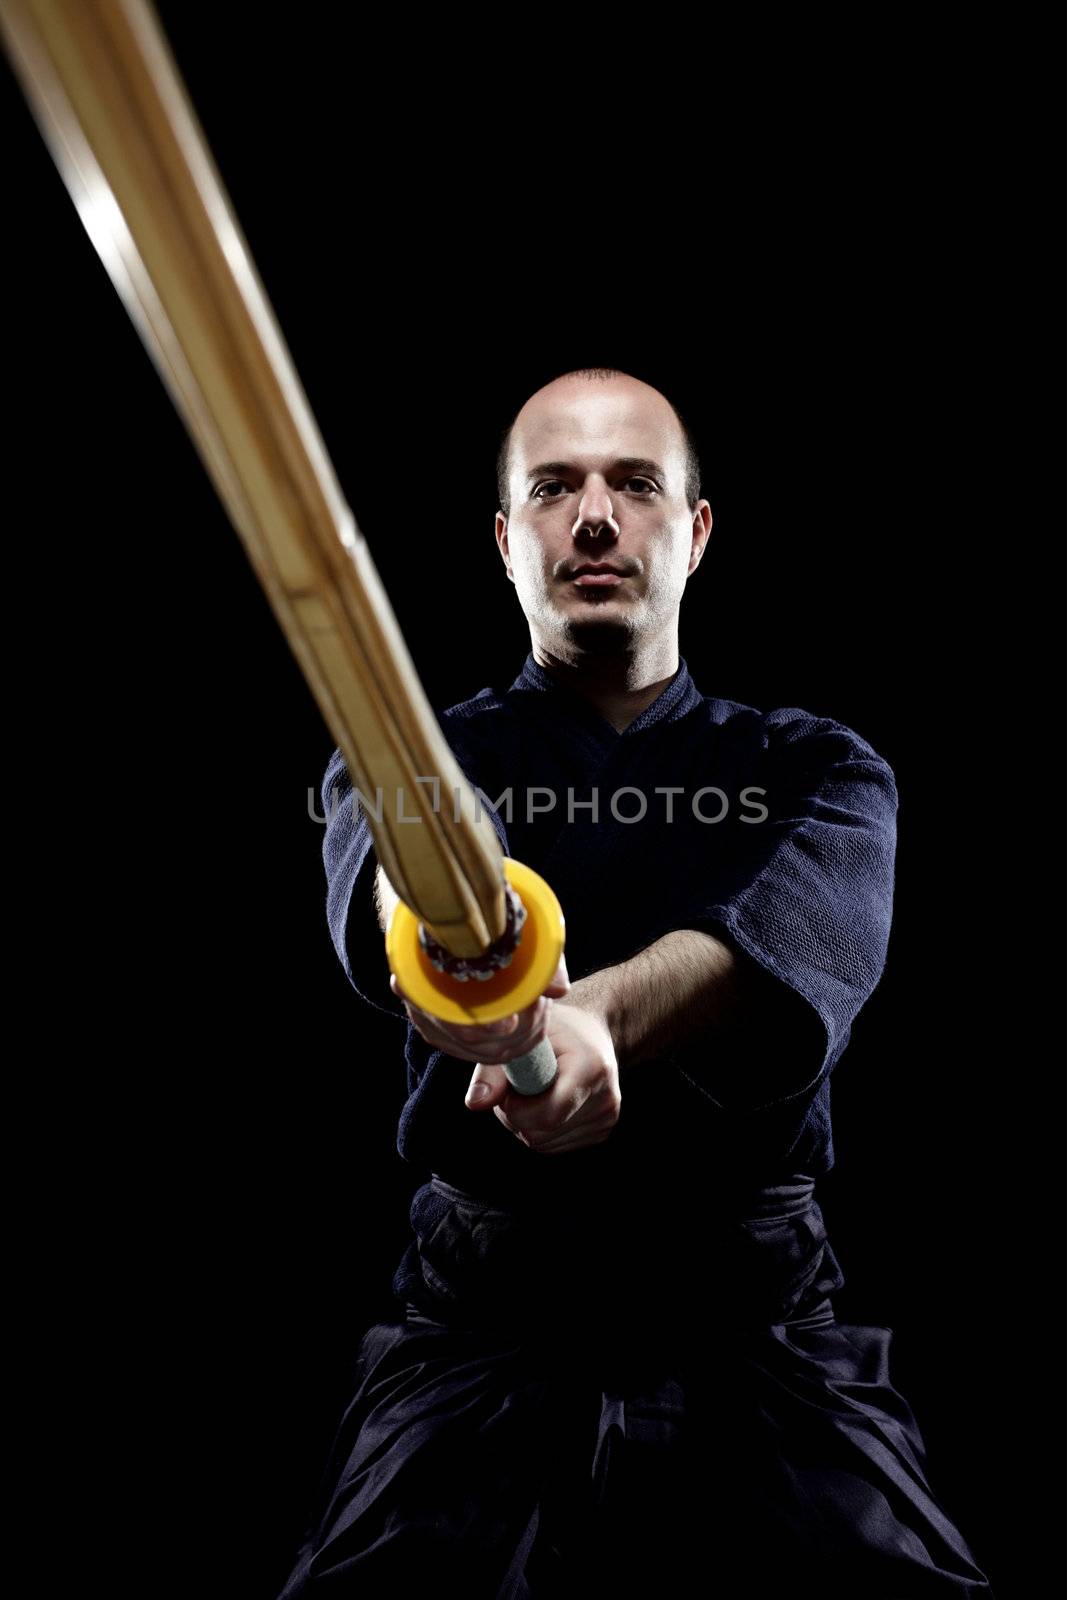 portrait of a kendo fighter with shinai, against black backgroung